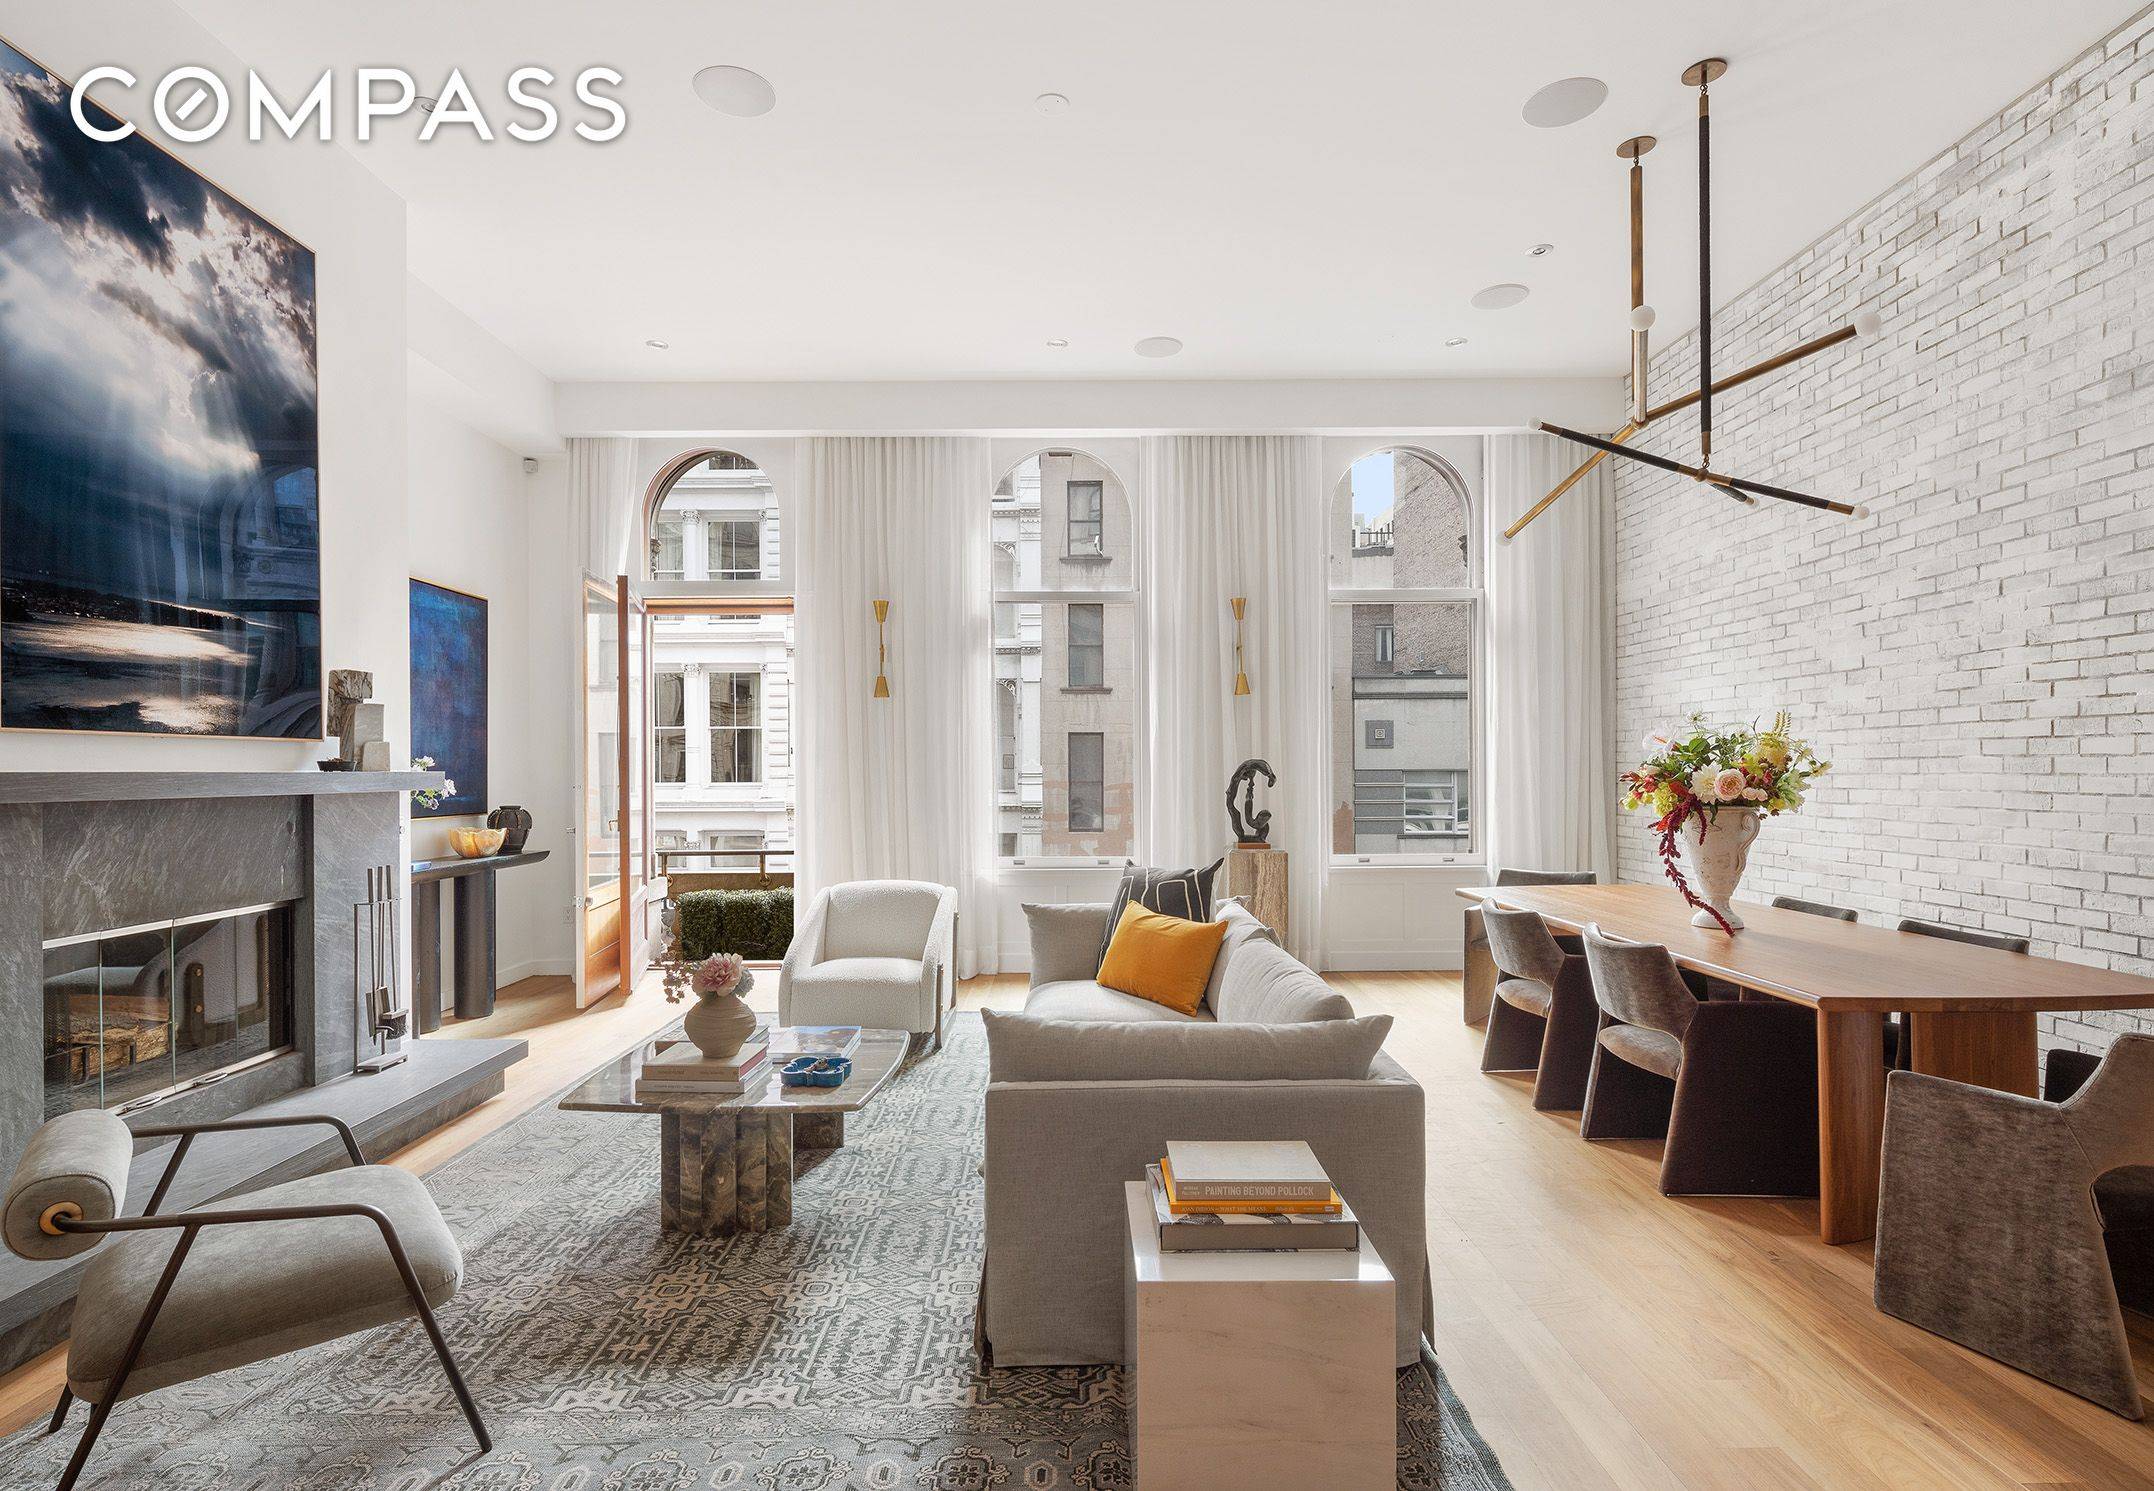 New Price ! Perfectly perched in an immaculately converted landmark 24 hour doorman condominium loft building on a quiet cobblestone block of Mercer Street in SoHo s historic cast iron ...